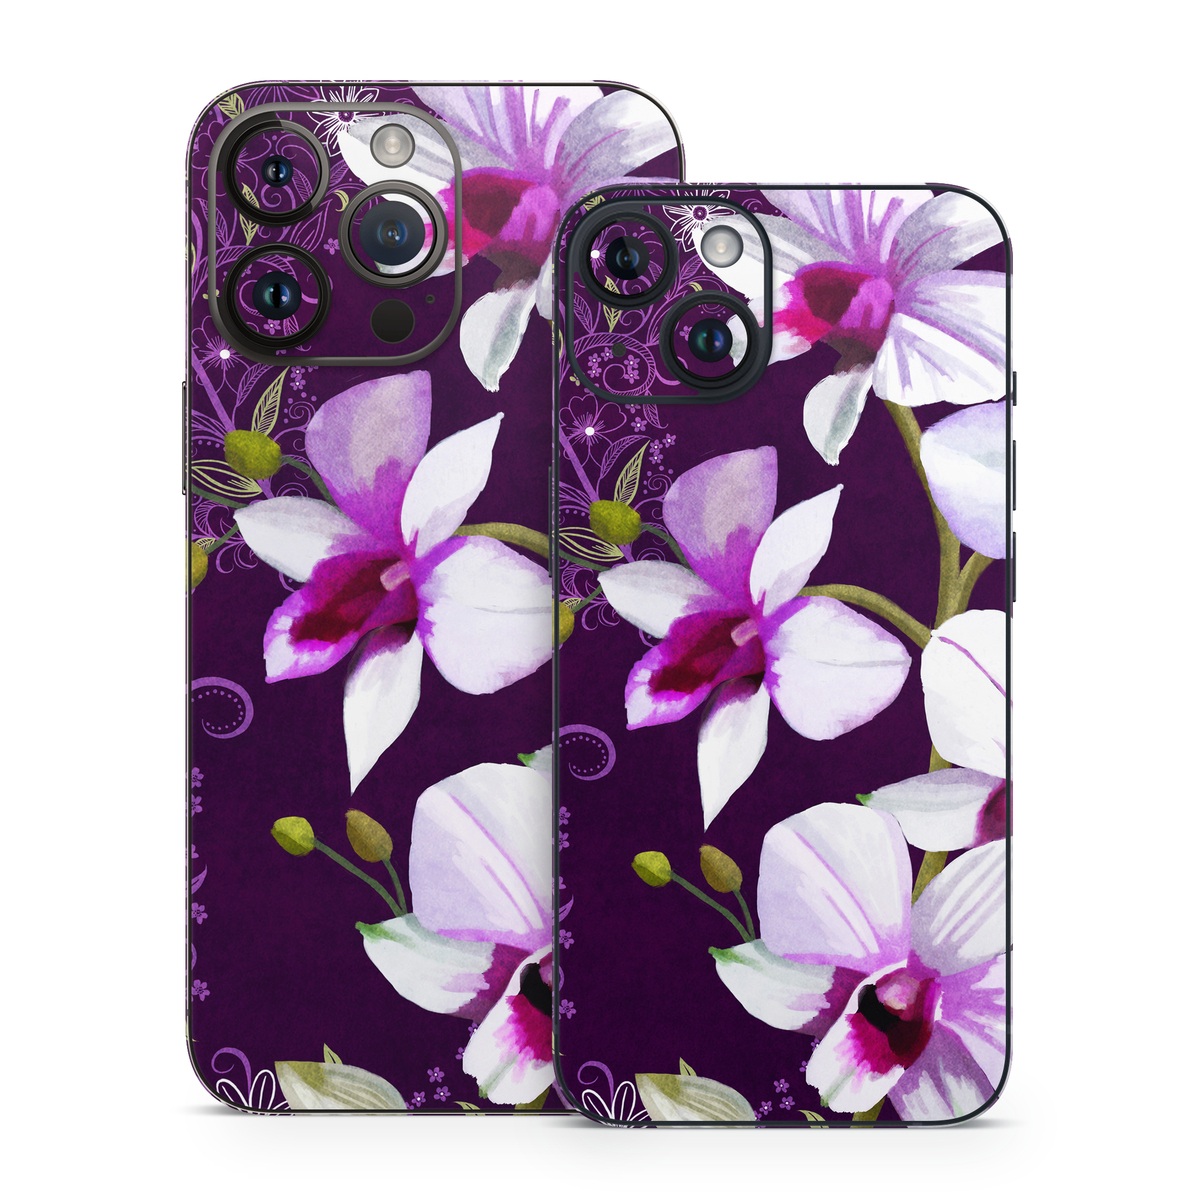 iPhone 14 Skin design of Flower, Purple, Petal, Violet, Lilac, Plant, Flowering plant, cooktown orchid, Botany, Wildflower, with black, gray, white, purple, pink colors